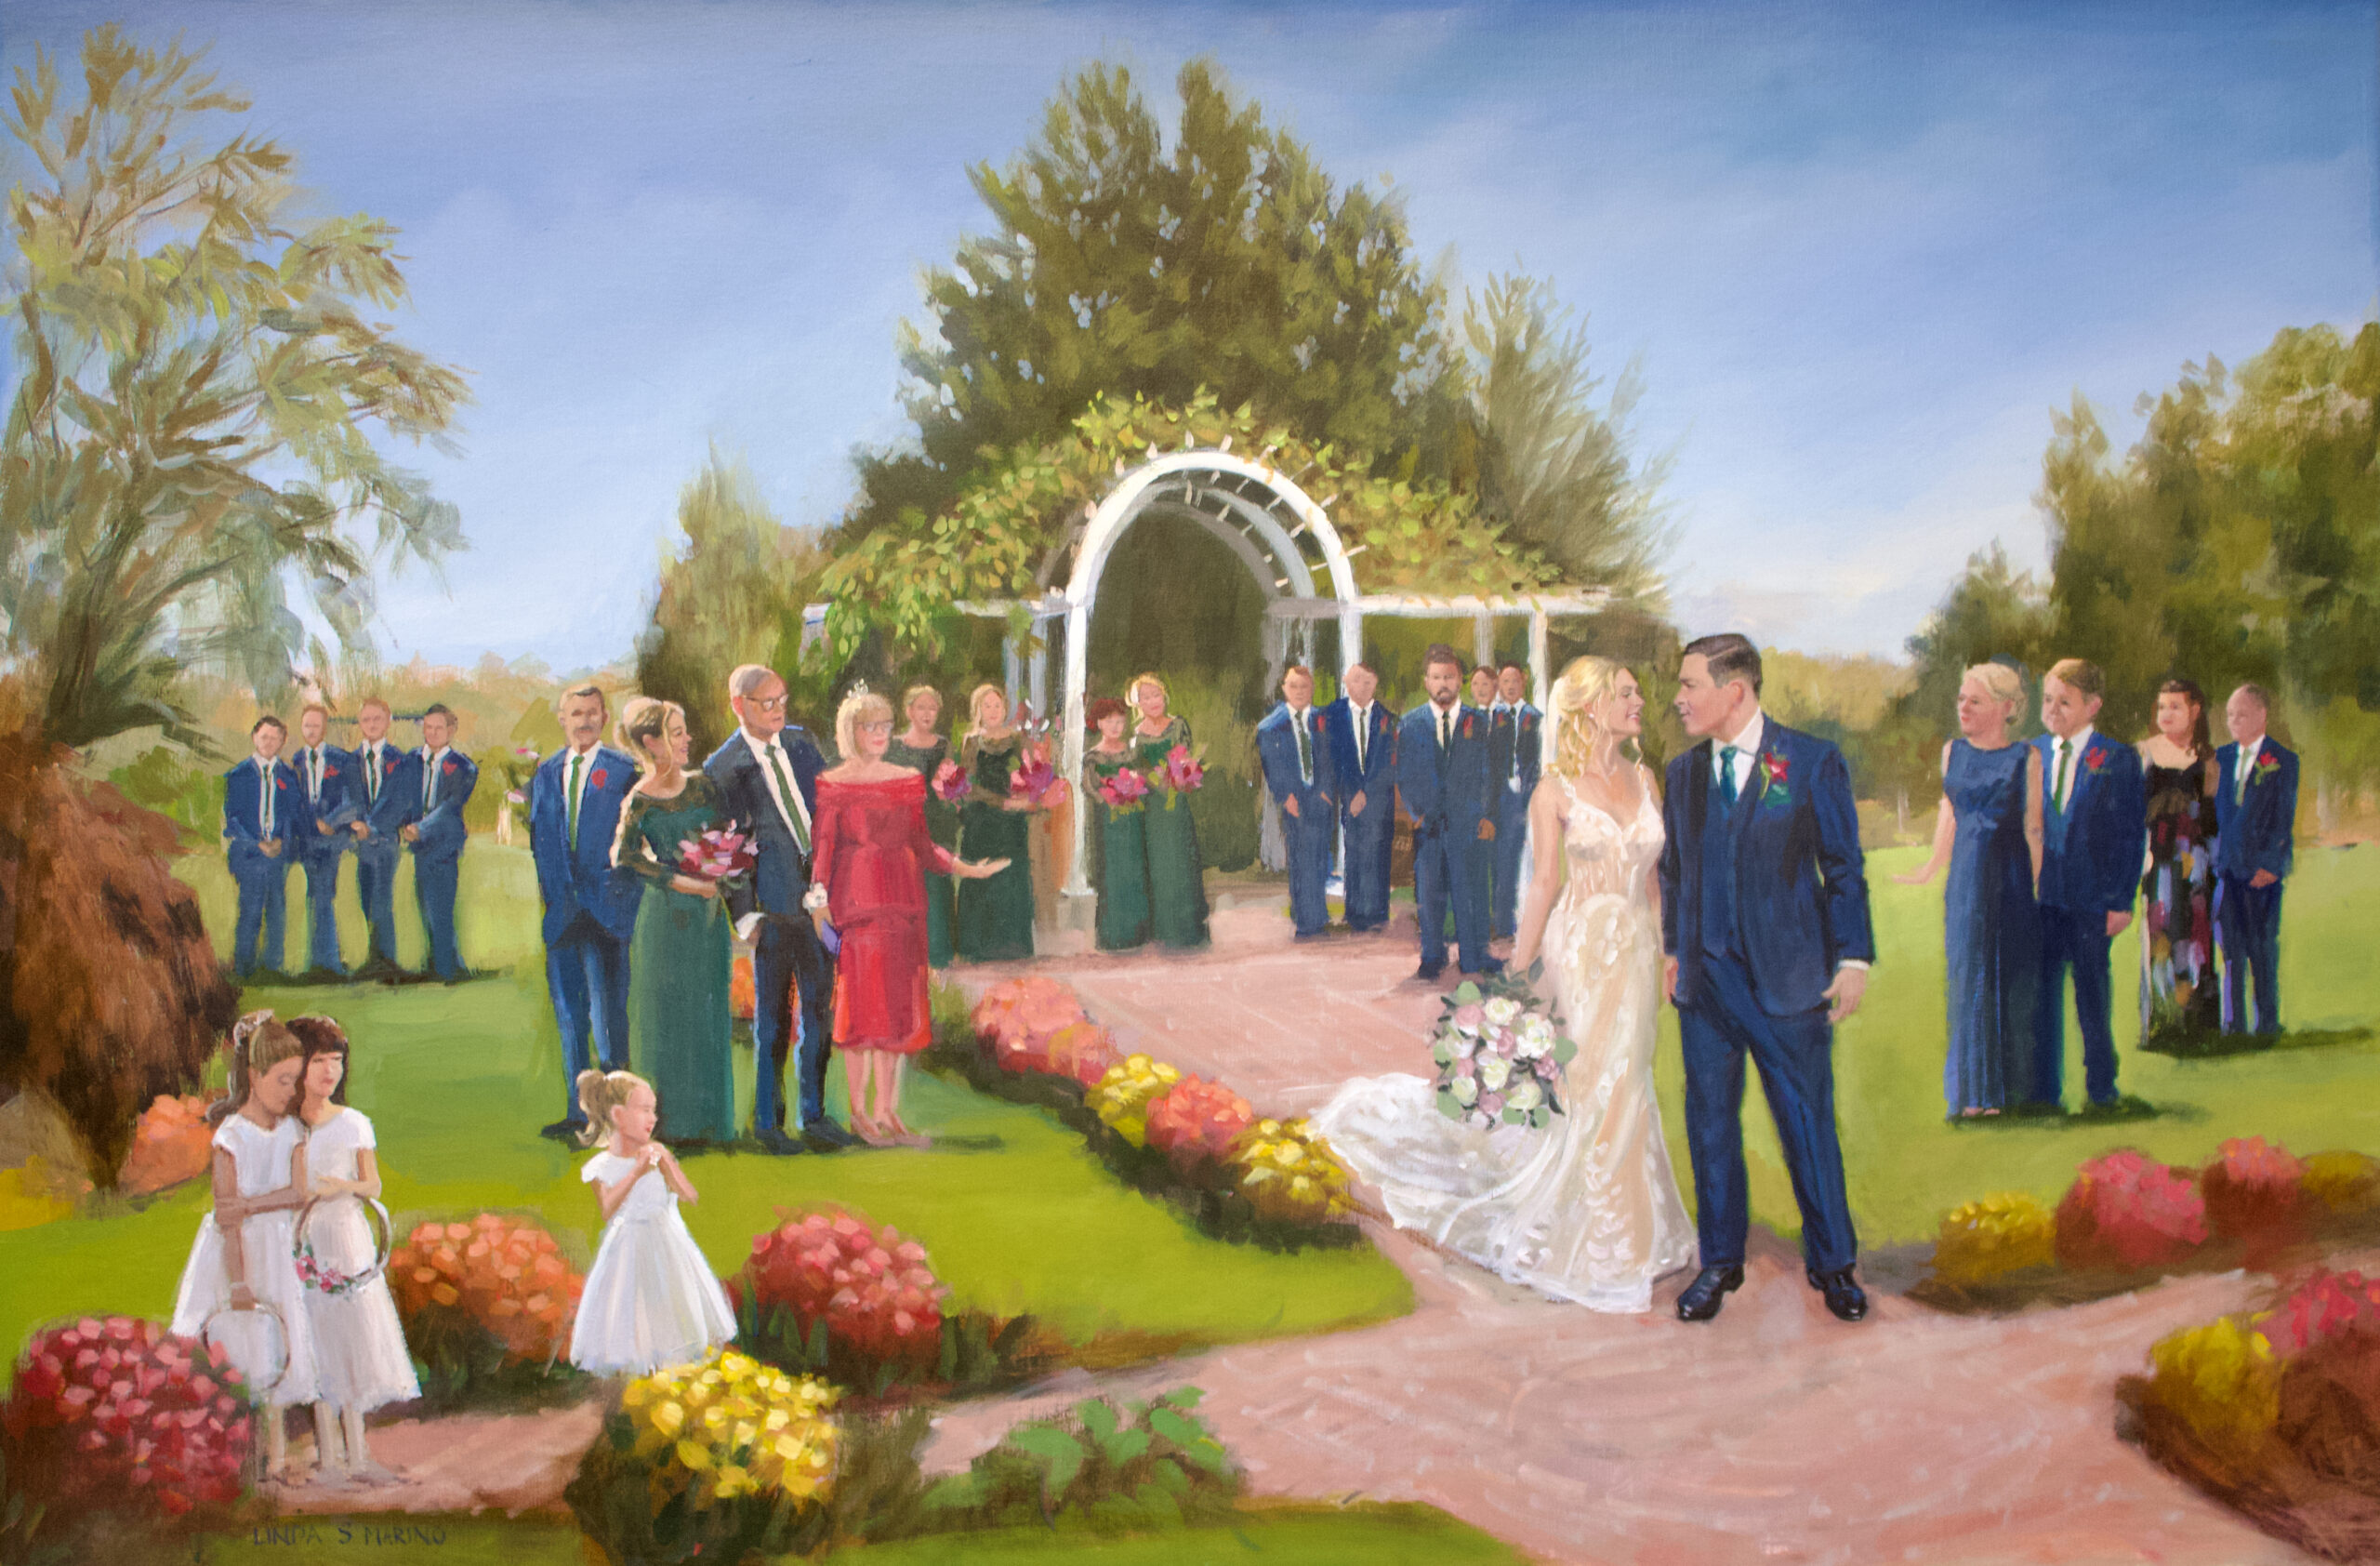 live painting at long island vineyard of couple's outdoor wedding ceremony with family and wedding party autum day by Linda Marino